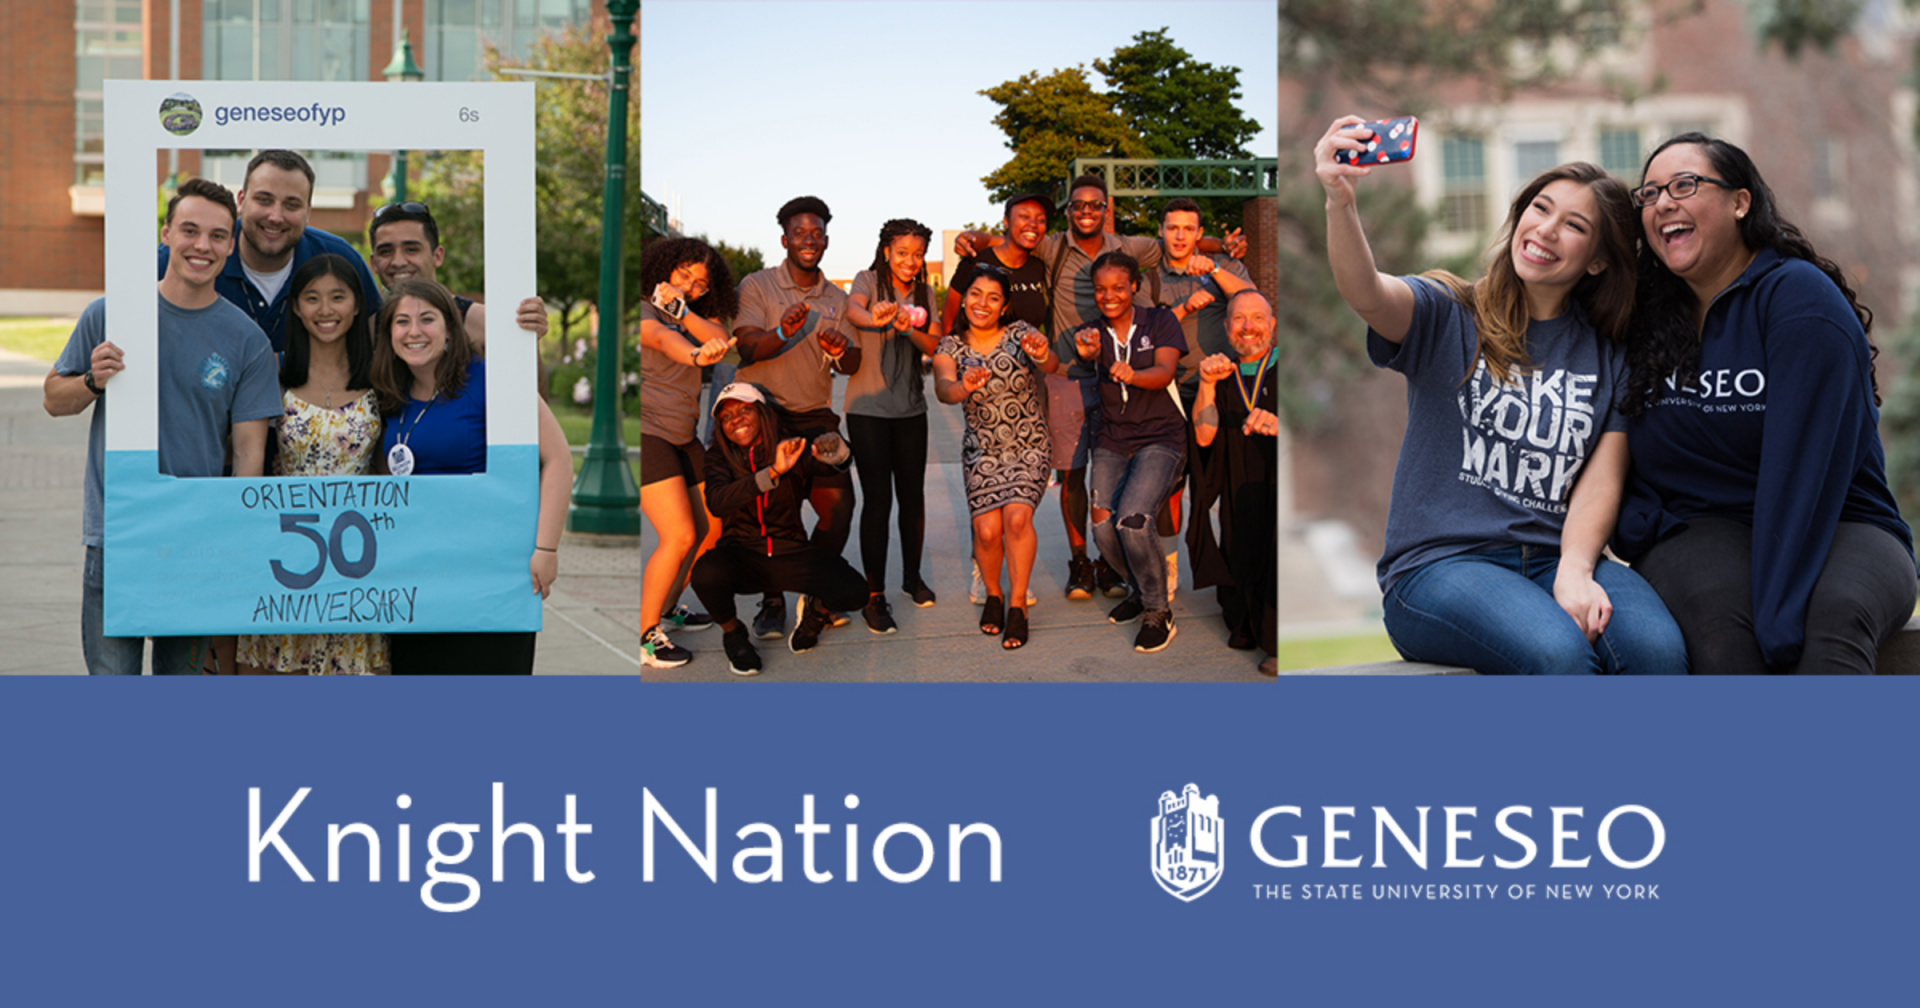 Three photos of groups of Geneseo students